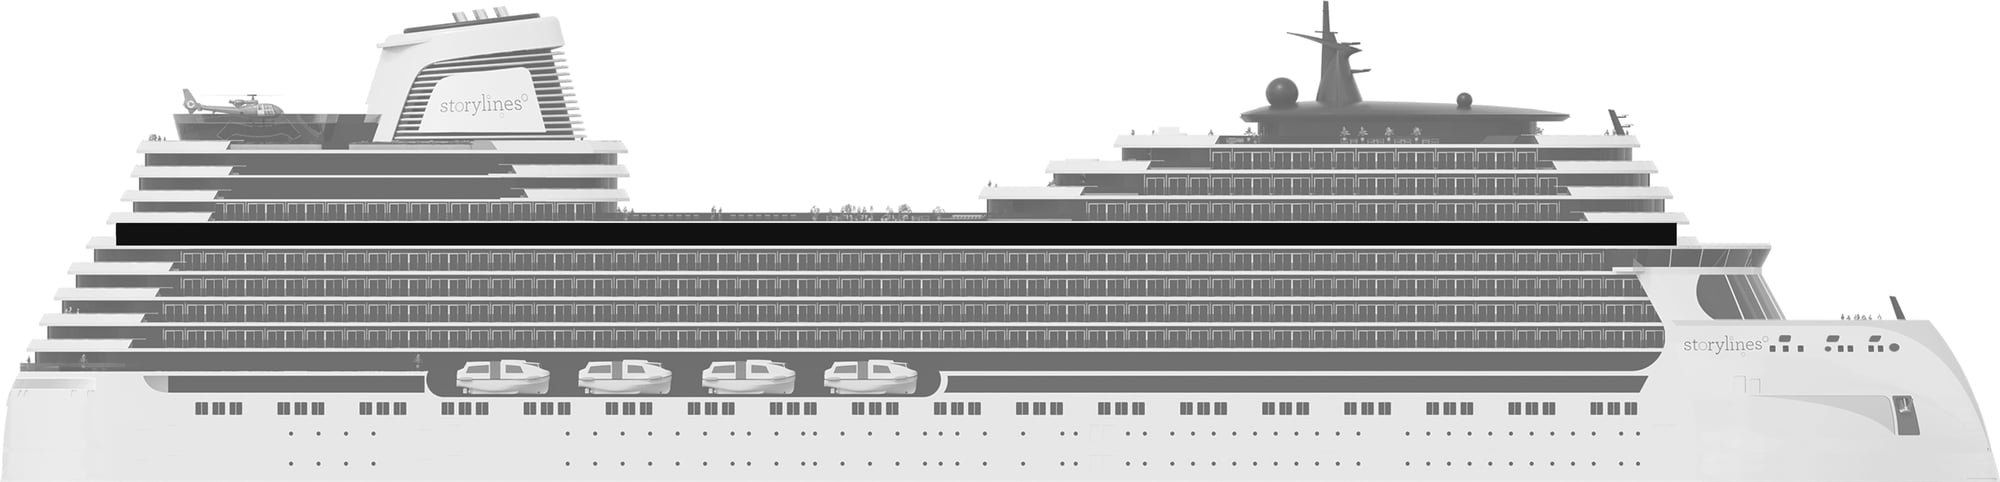 Profile shot of Storylines residential ship showing the location of Deck 14